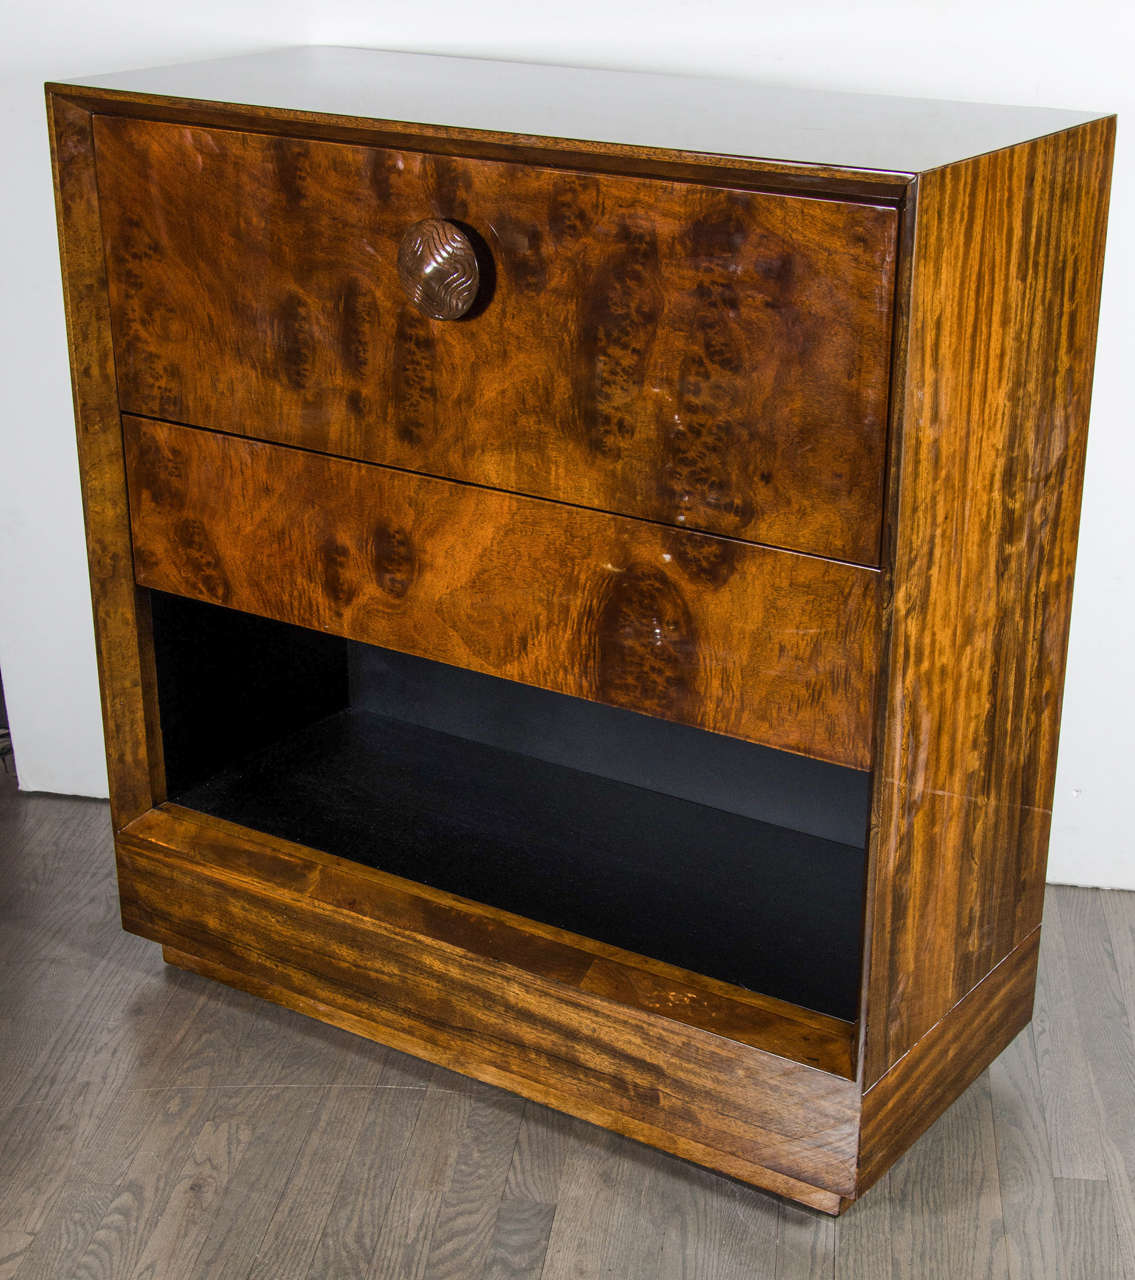 This significant Art Deco secretaire or bar cabinet by Gilbert Rohde features a drop front door which opens to create a serving or writing surface, it has a generous drawer for stowing away accessories and an open niche at the bottom. The